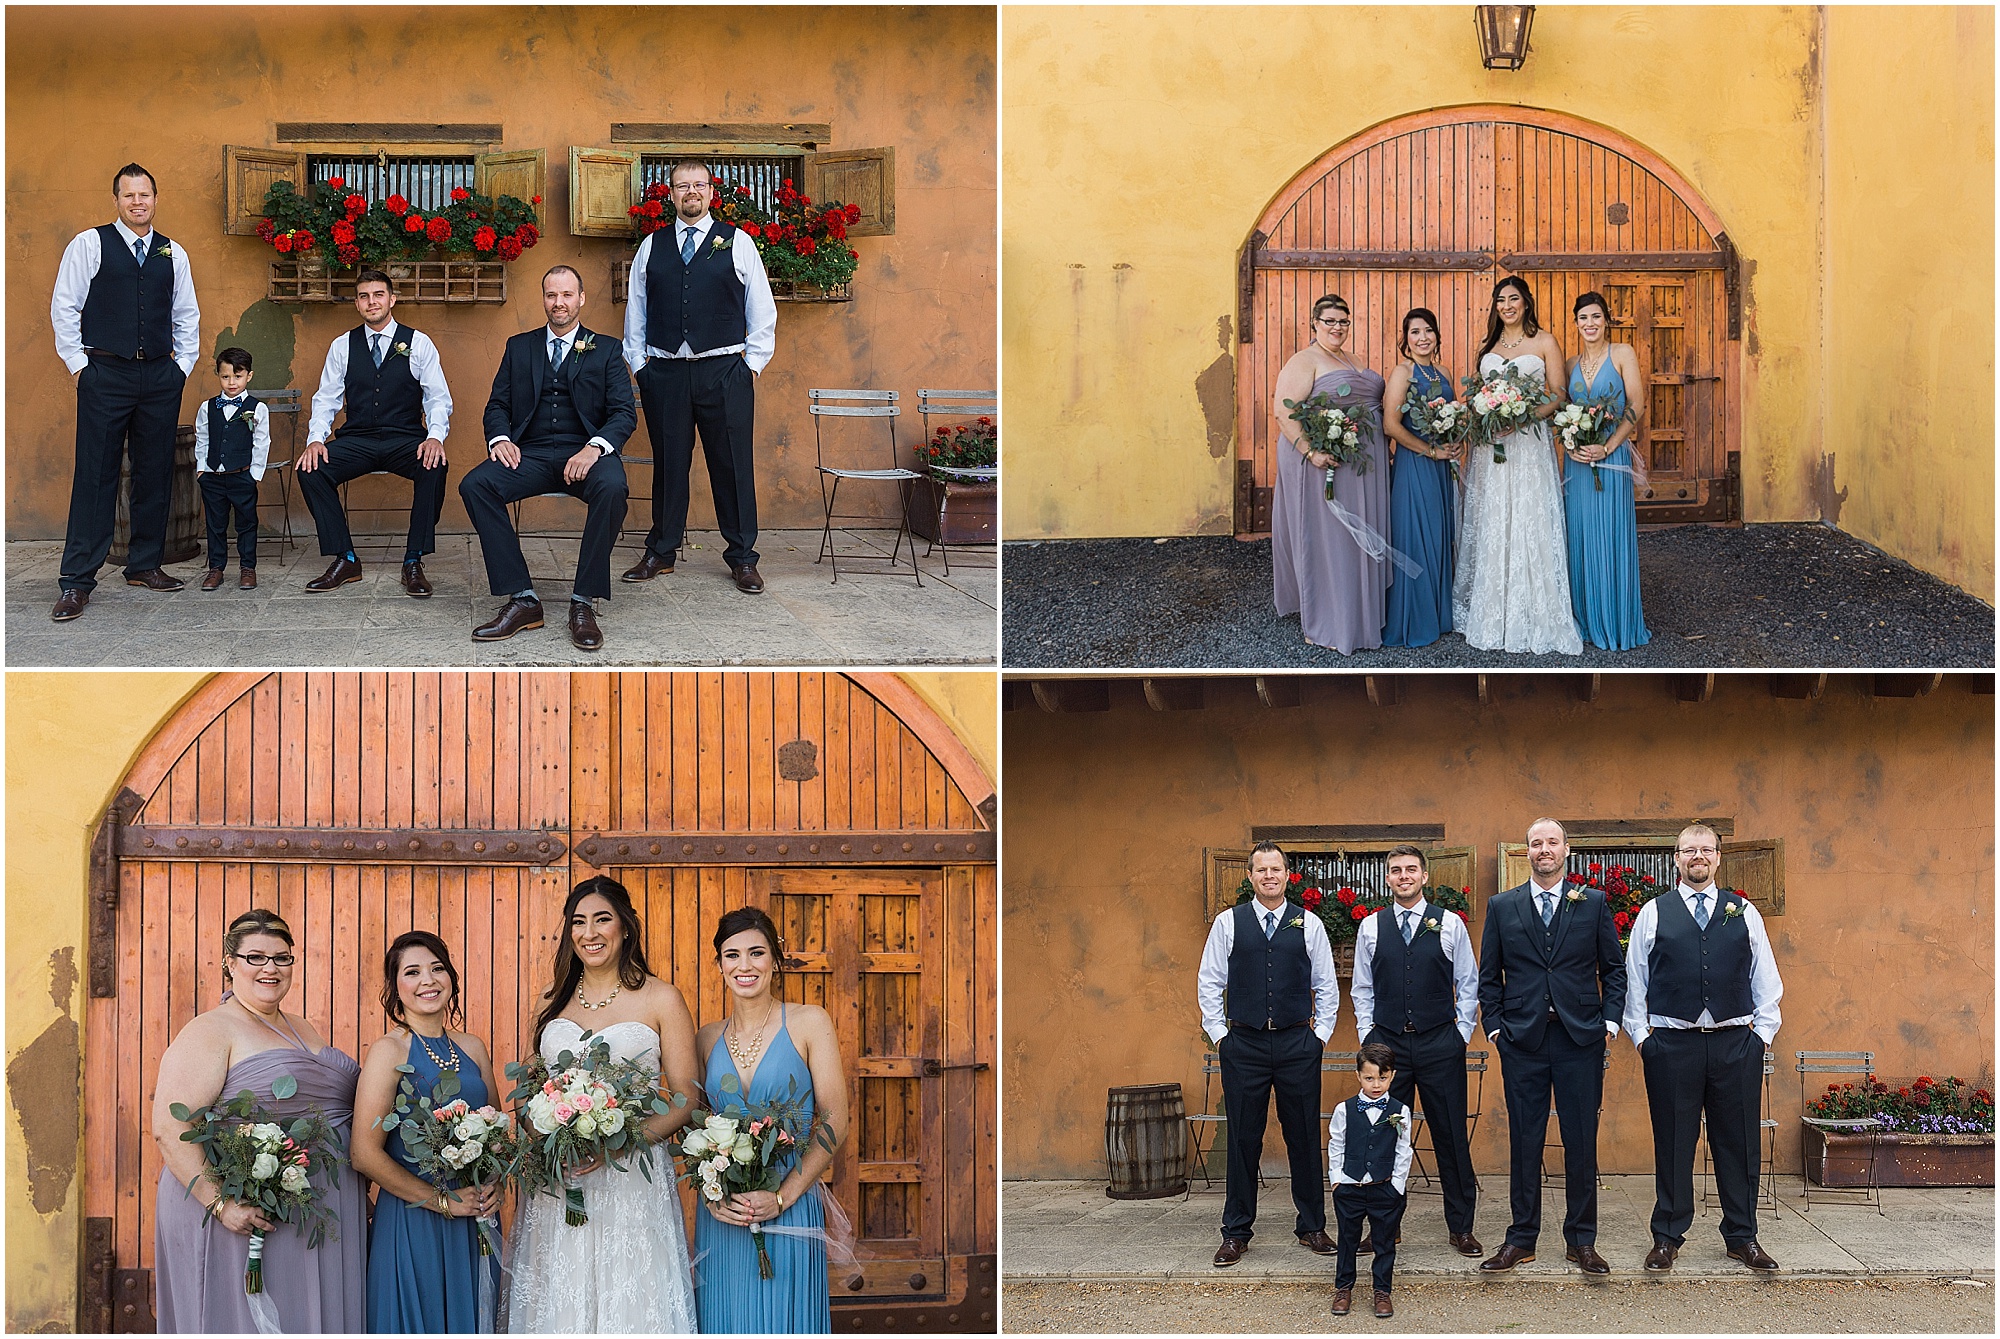 Bridesmaid and groomsmen formal photos at the Tuscan Stables wedding venue at Ranch at the Canyons in Central Oreogn. | Erica Swantek Photograpy